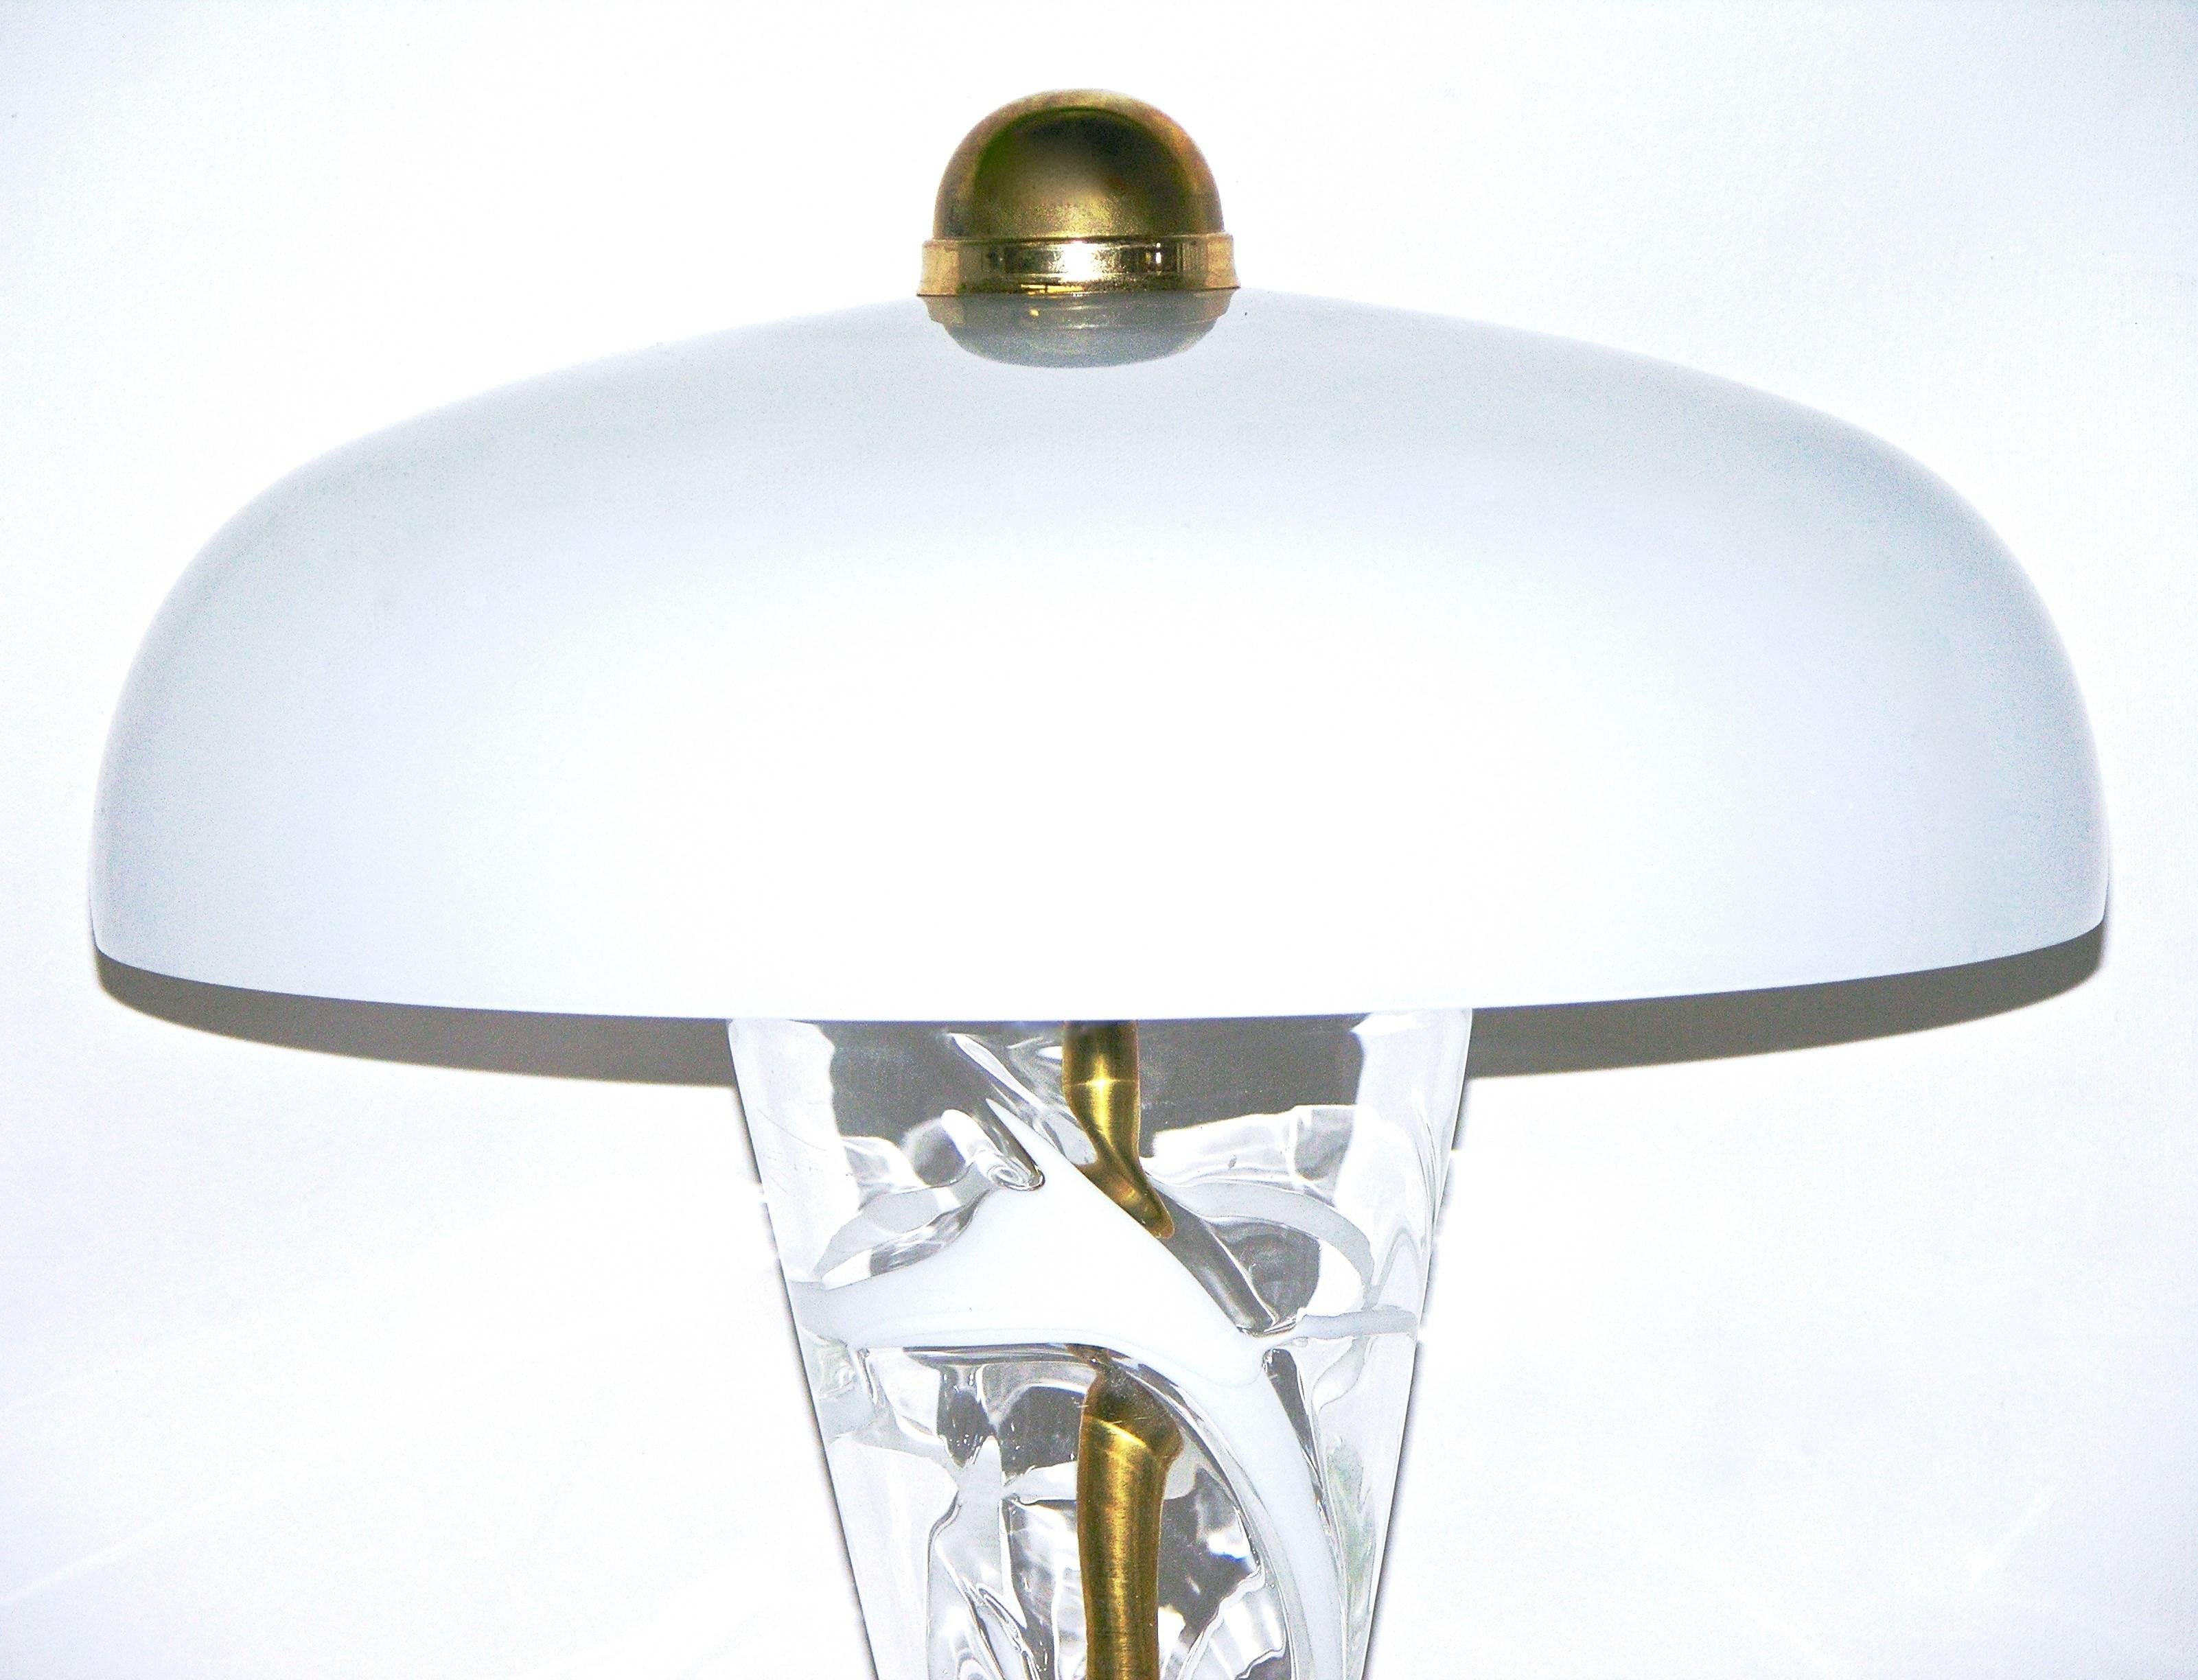 1970s unique Italian custom made Murano glass lamp attributed to Vistosi, handcrafted in brass with exclusive blown Murano glass elements. Very high quality of the construction and attention to design details, like the clear rock glass enclosed in